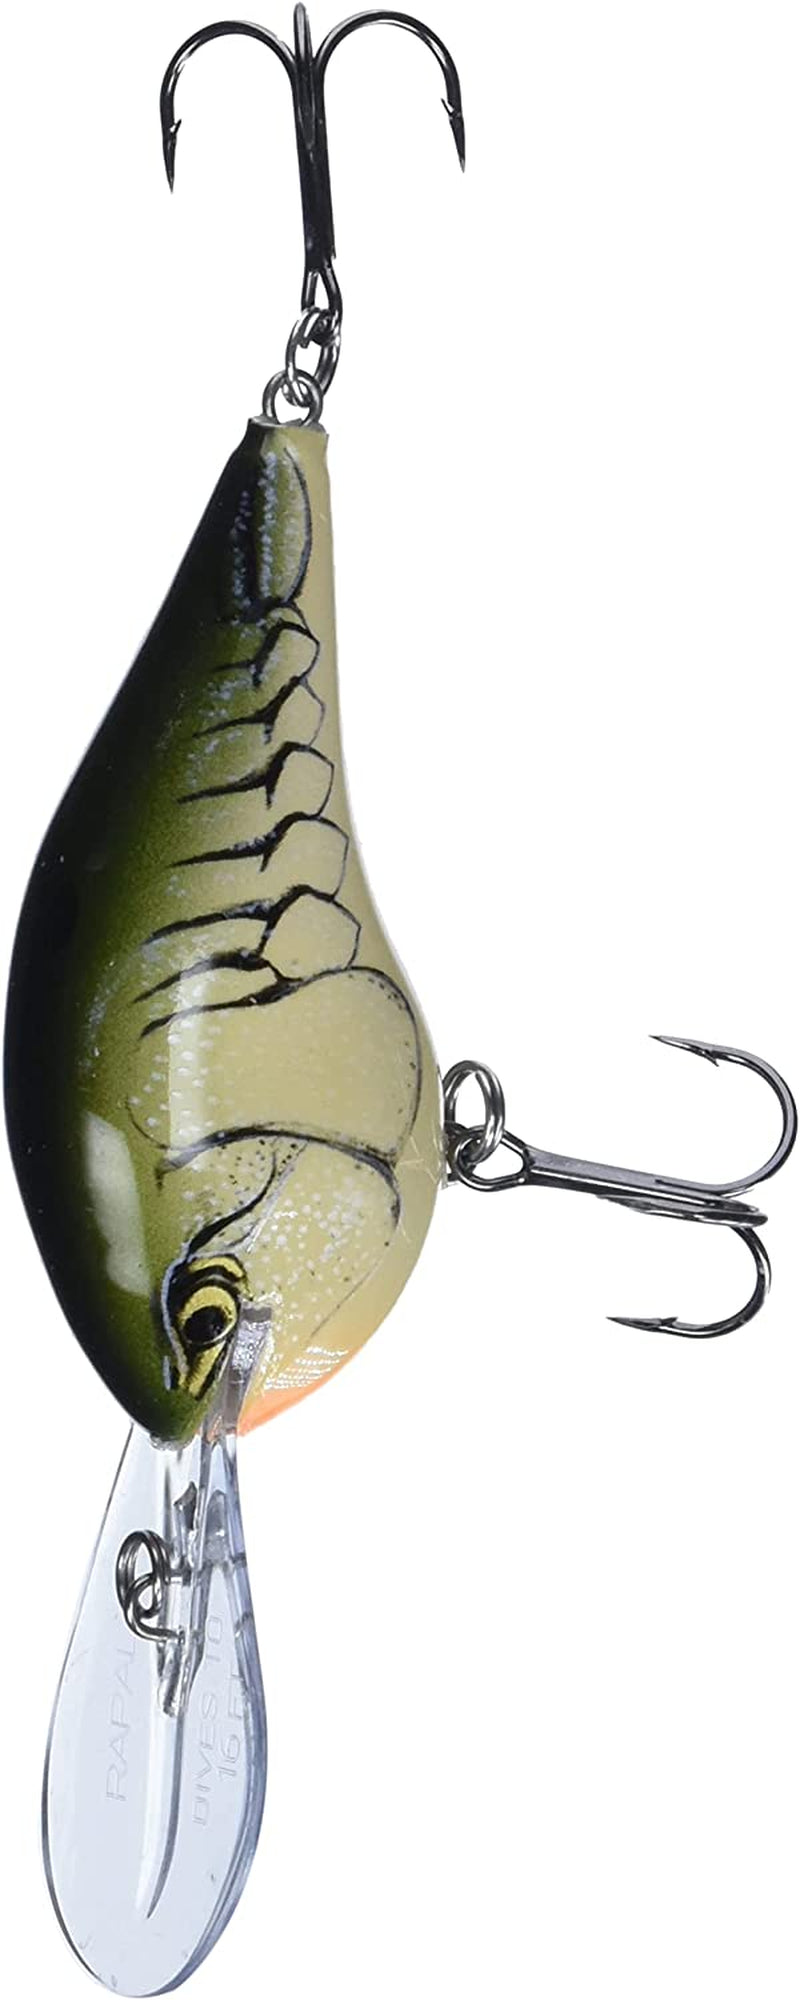 Rapala Rapala Dives to 16 Fishing Lure 2 75 Inch Sporting Goods > Outdoor Recreation > Fishing > Fishing Tackle > Fishing Baits & Lures Rapala Olive Green Craw Size 16, 2.75-Inch 